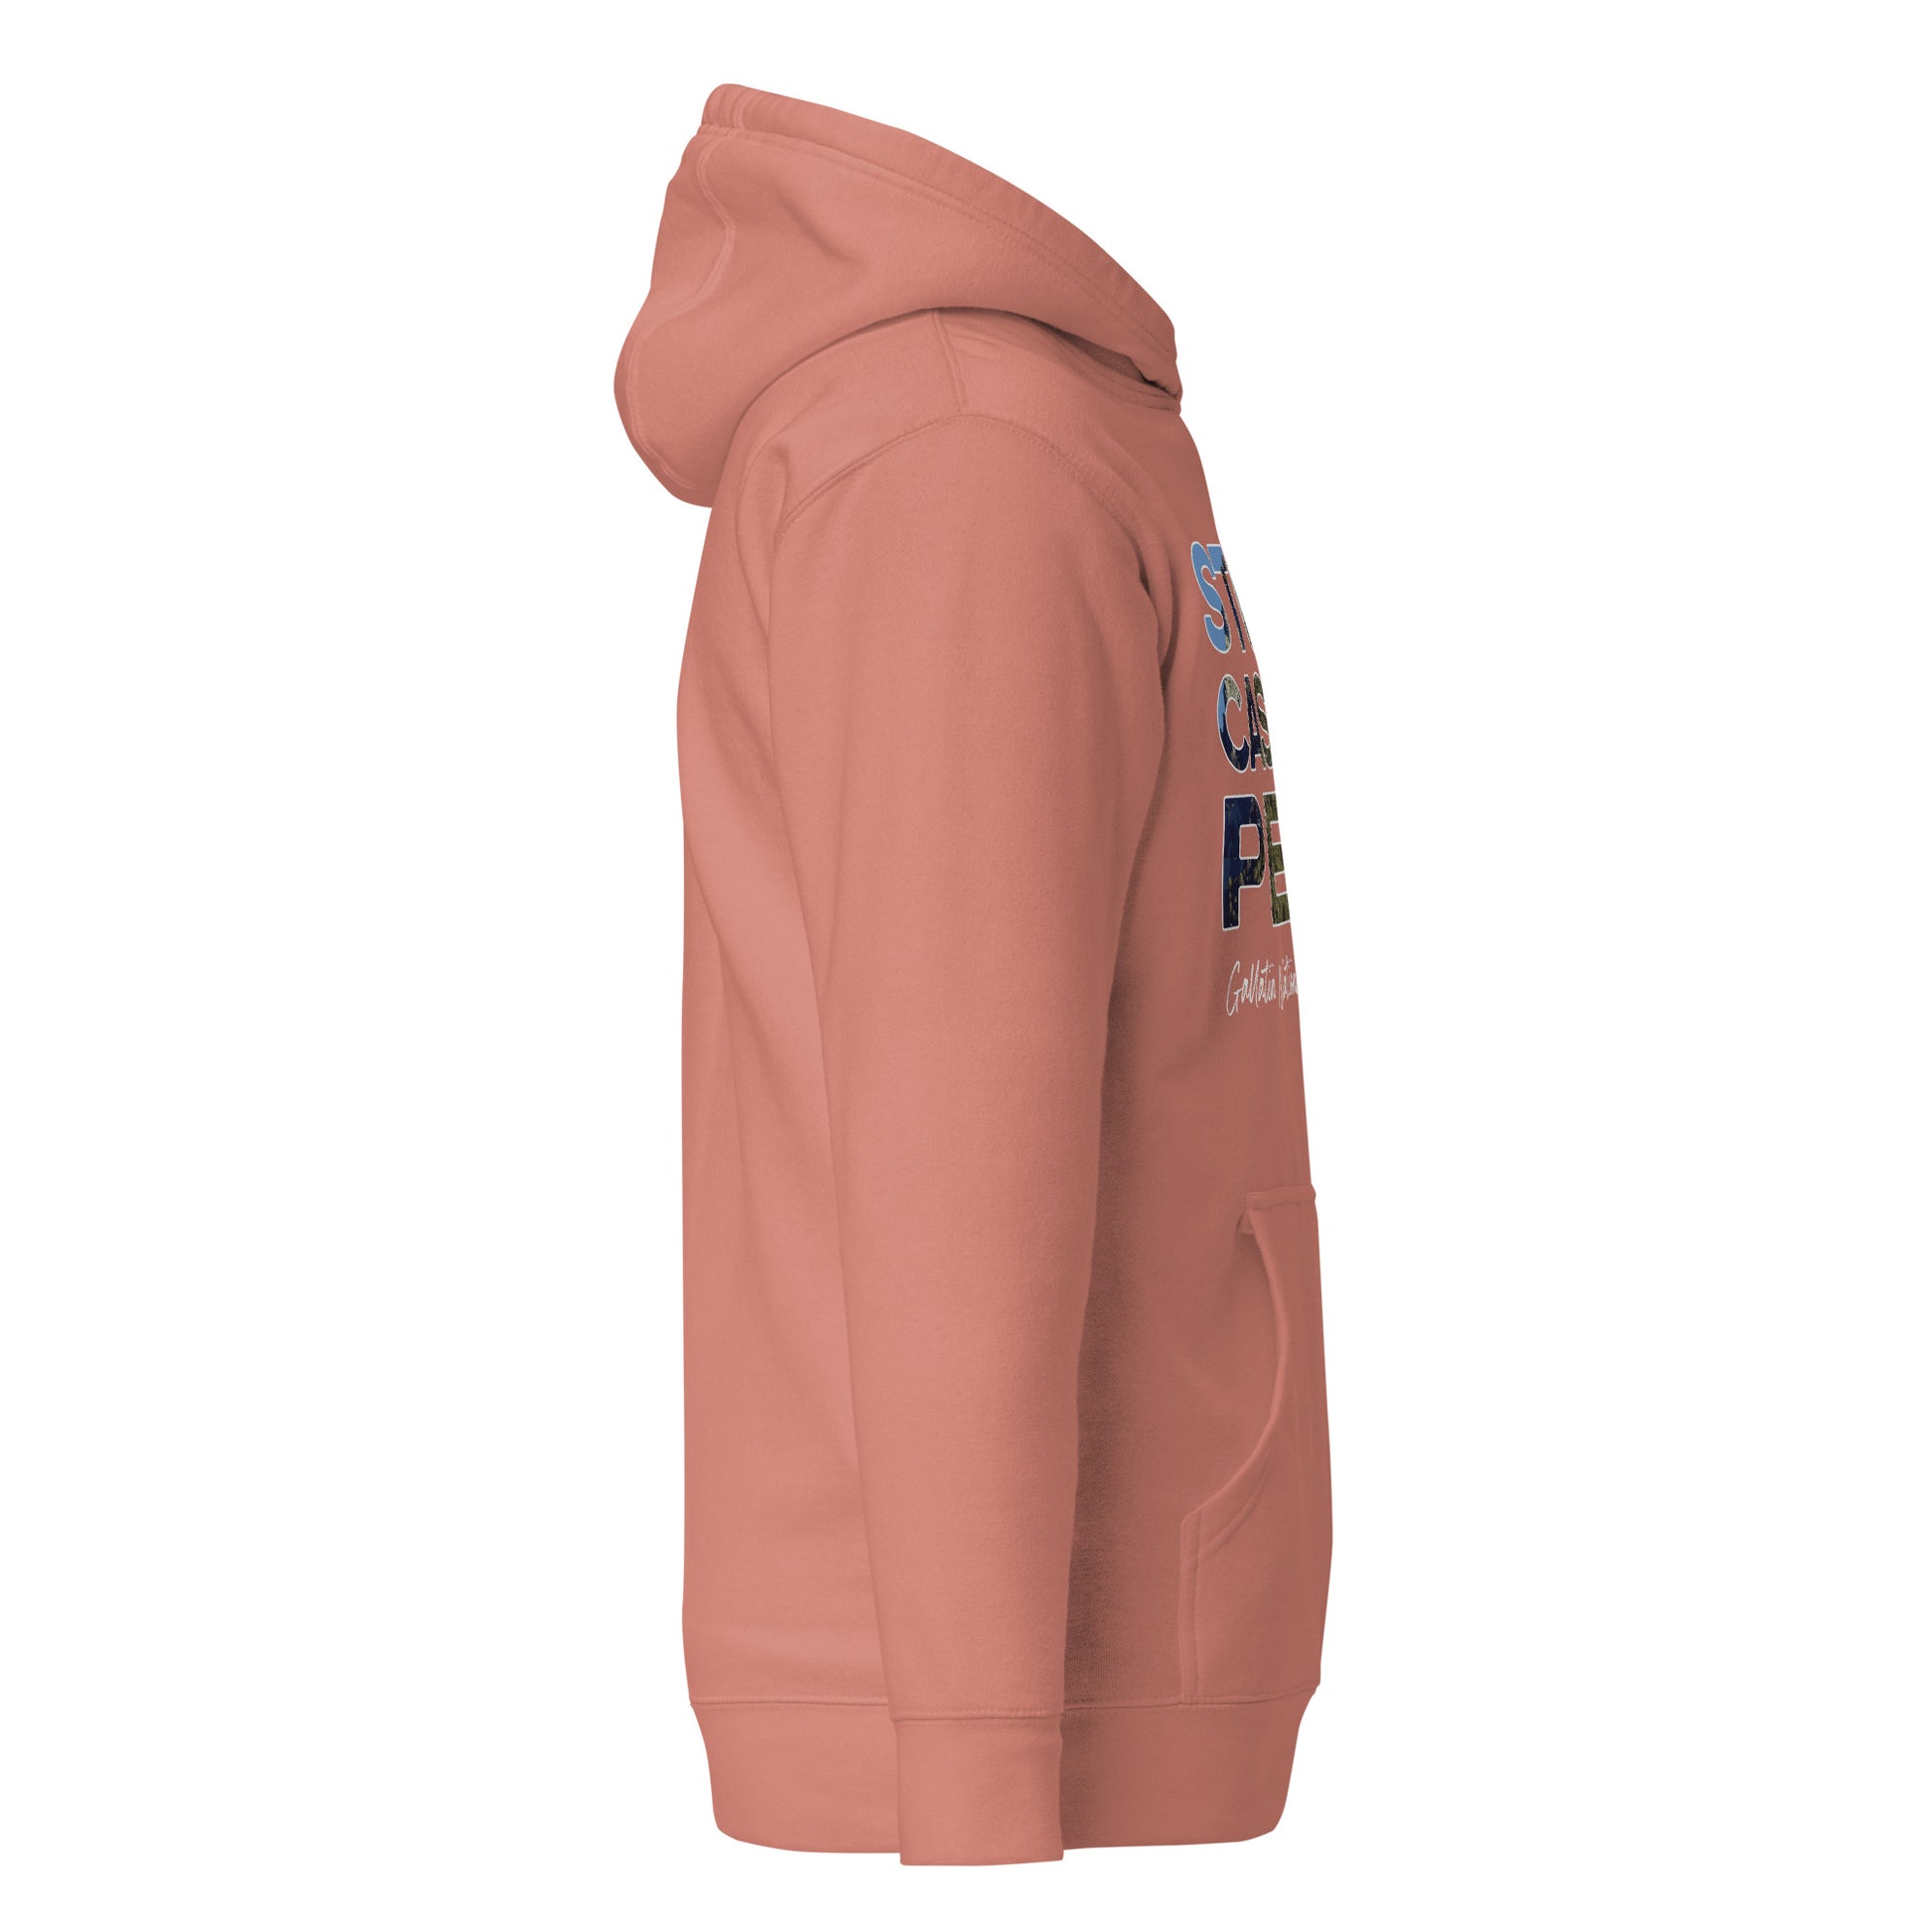 Right Side view of Storm Castle Peak in Custer Gallatin National Forest Montana Dusty Rose Cotton Hoodie from Park Attire